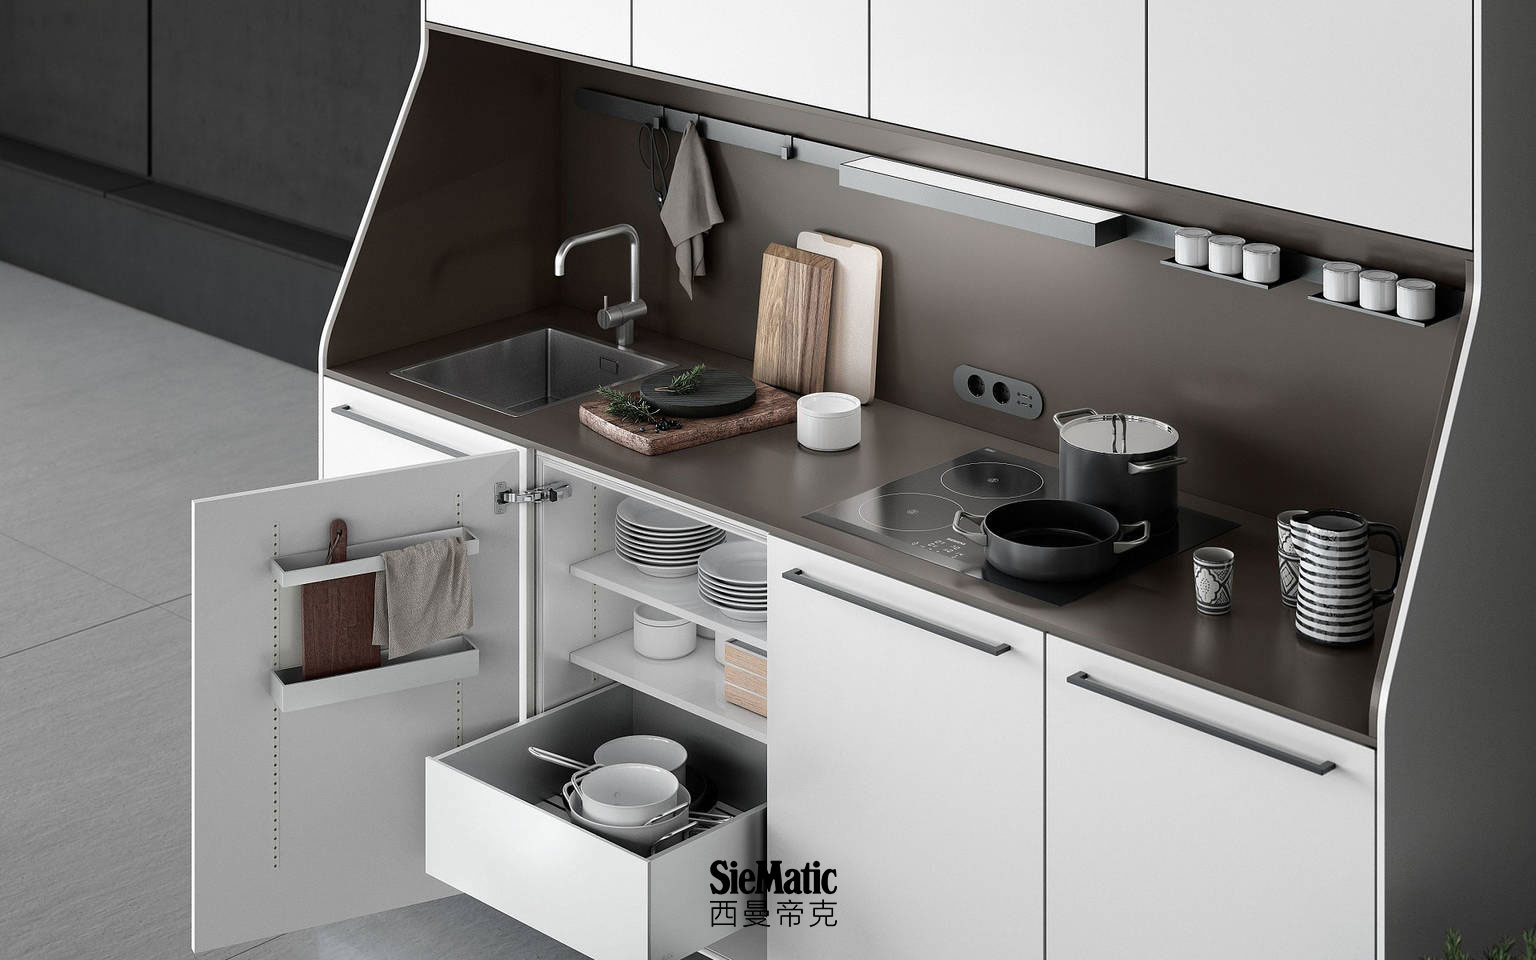 SieMatic 29 freestanding kitchen furniture in lotus white with sink, stovetop, outlets and SieMatic MultiMatic interior organization